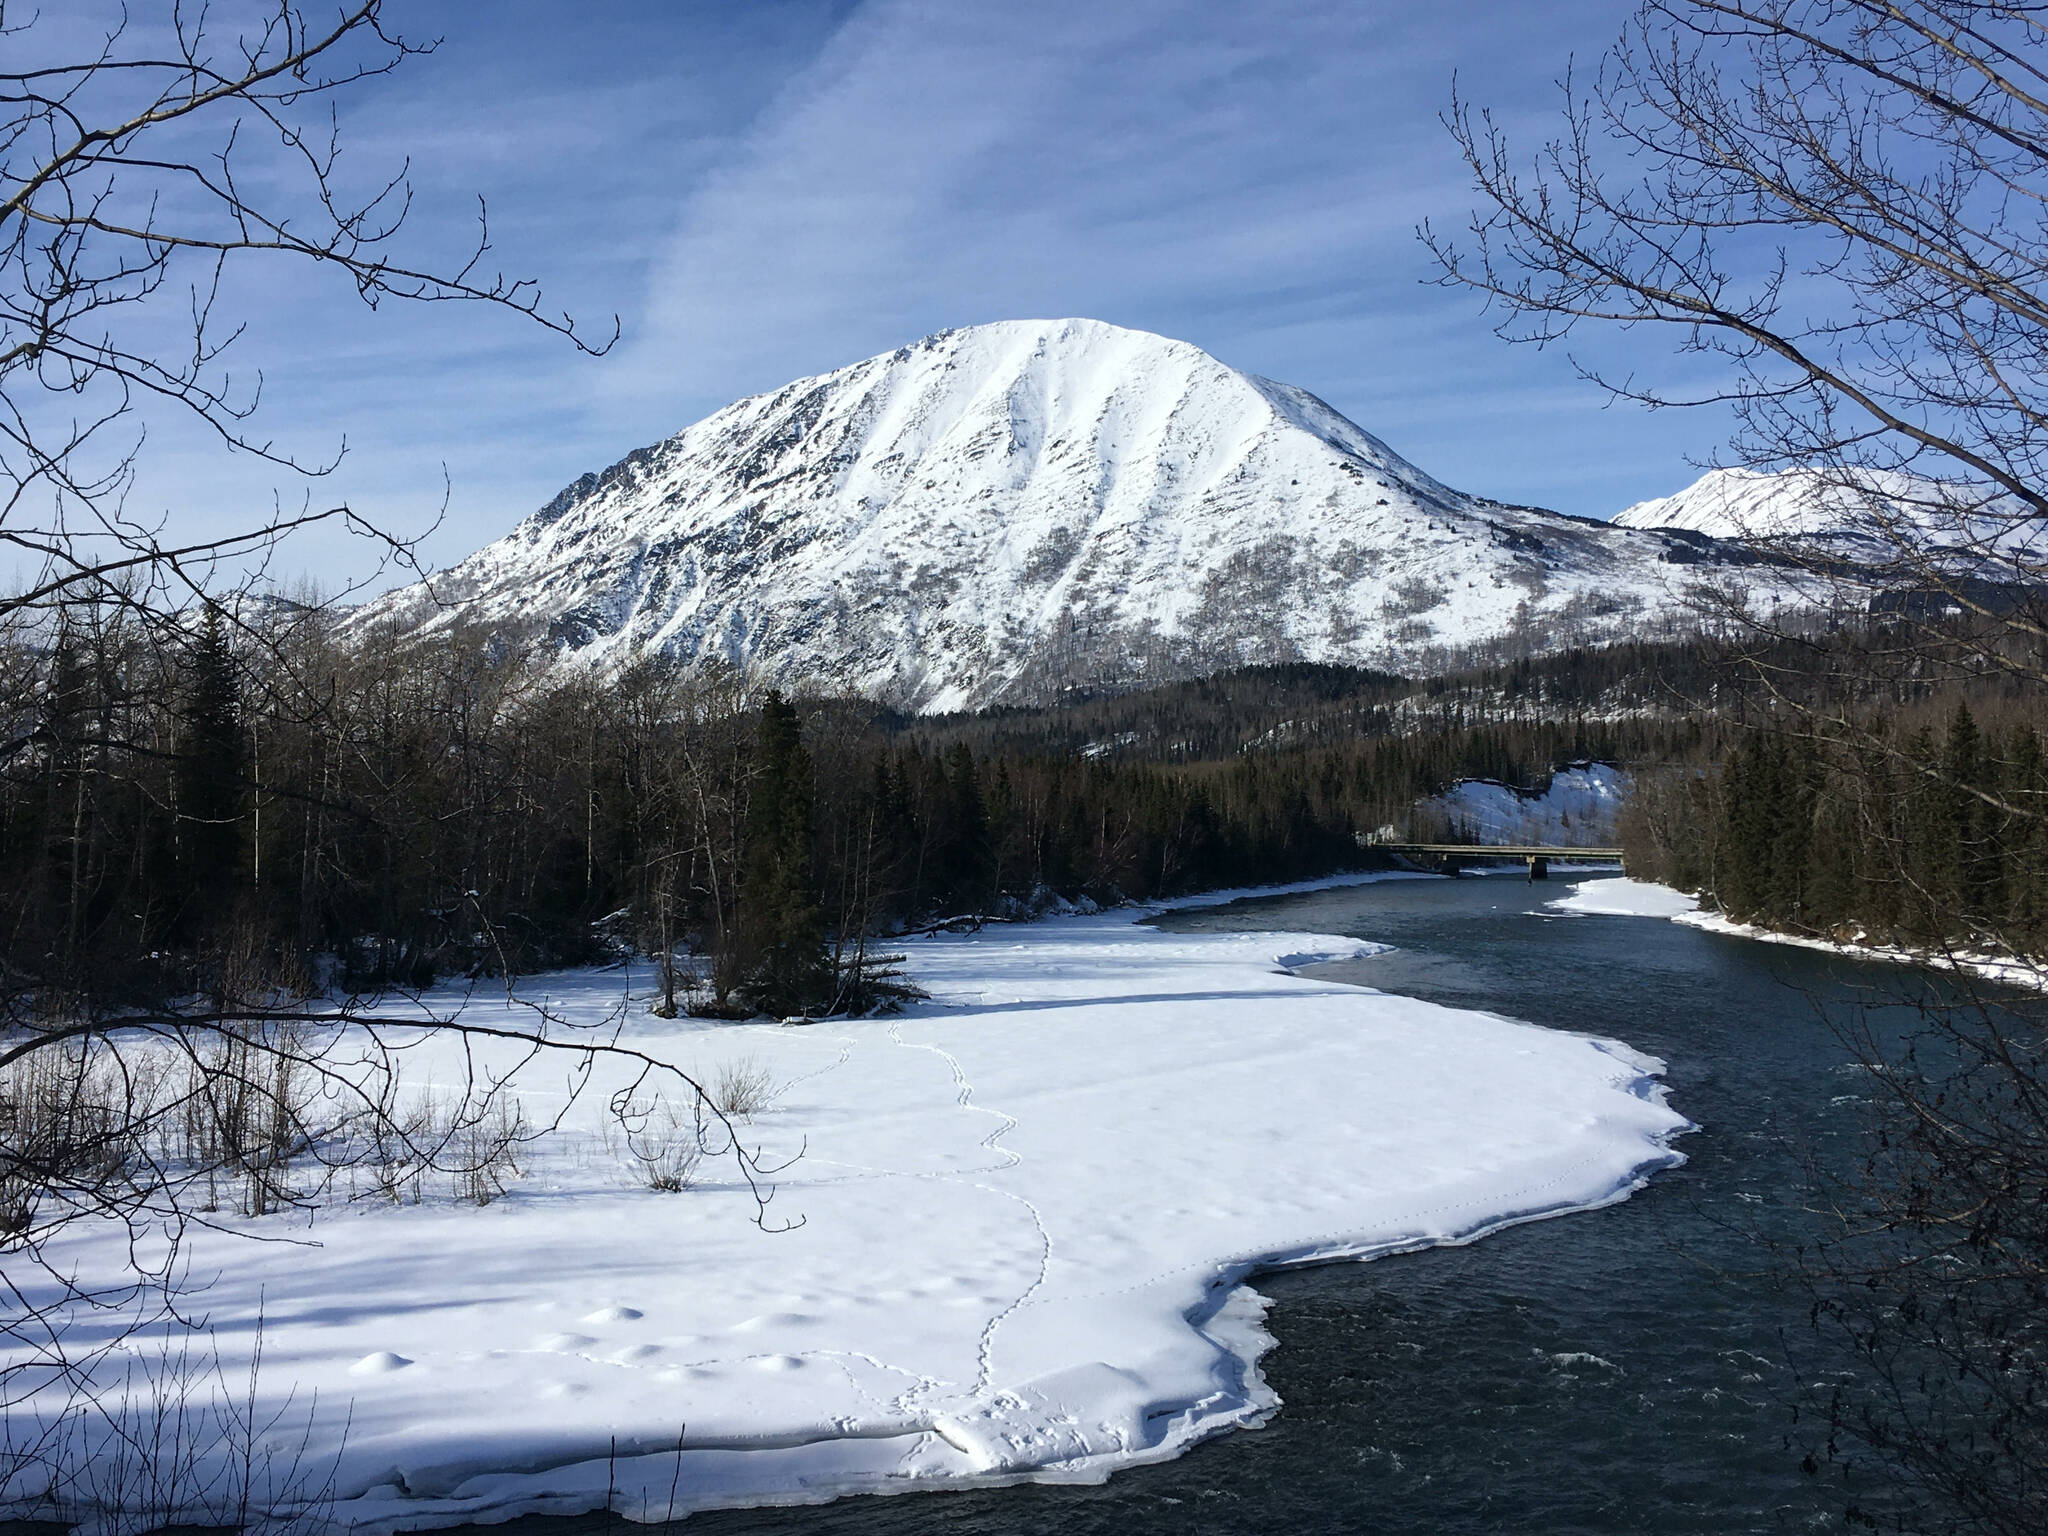 The Sterling Highway crosses the Kenai River near the Russian River Campground on March 15, 2020 near Cooper Landing, Alaska. (Jeff Helminiak/Peninsula Clarion)